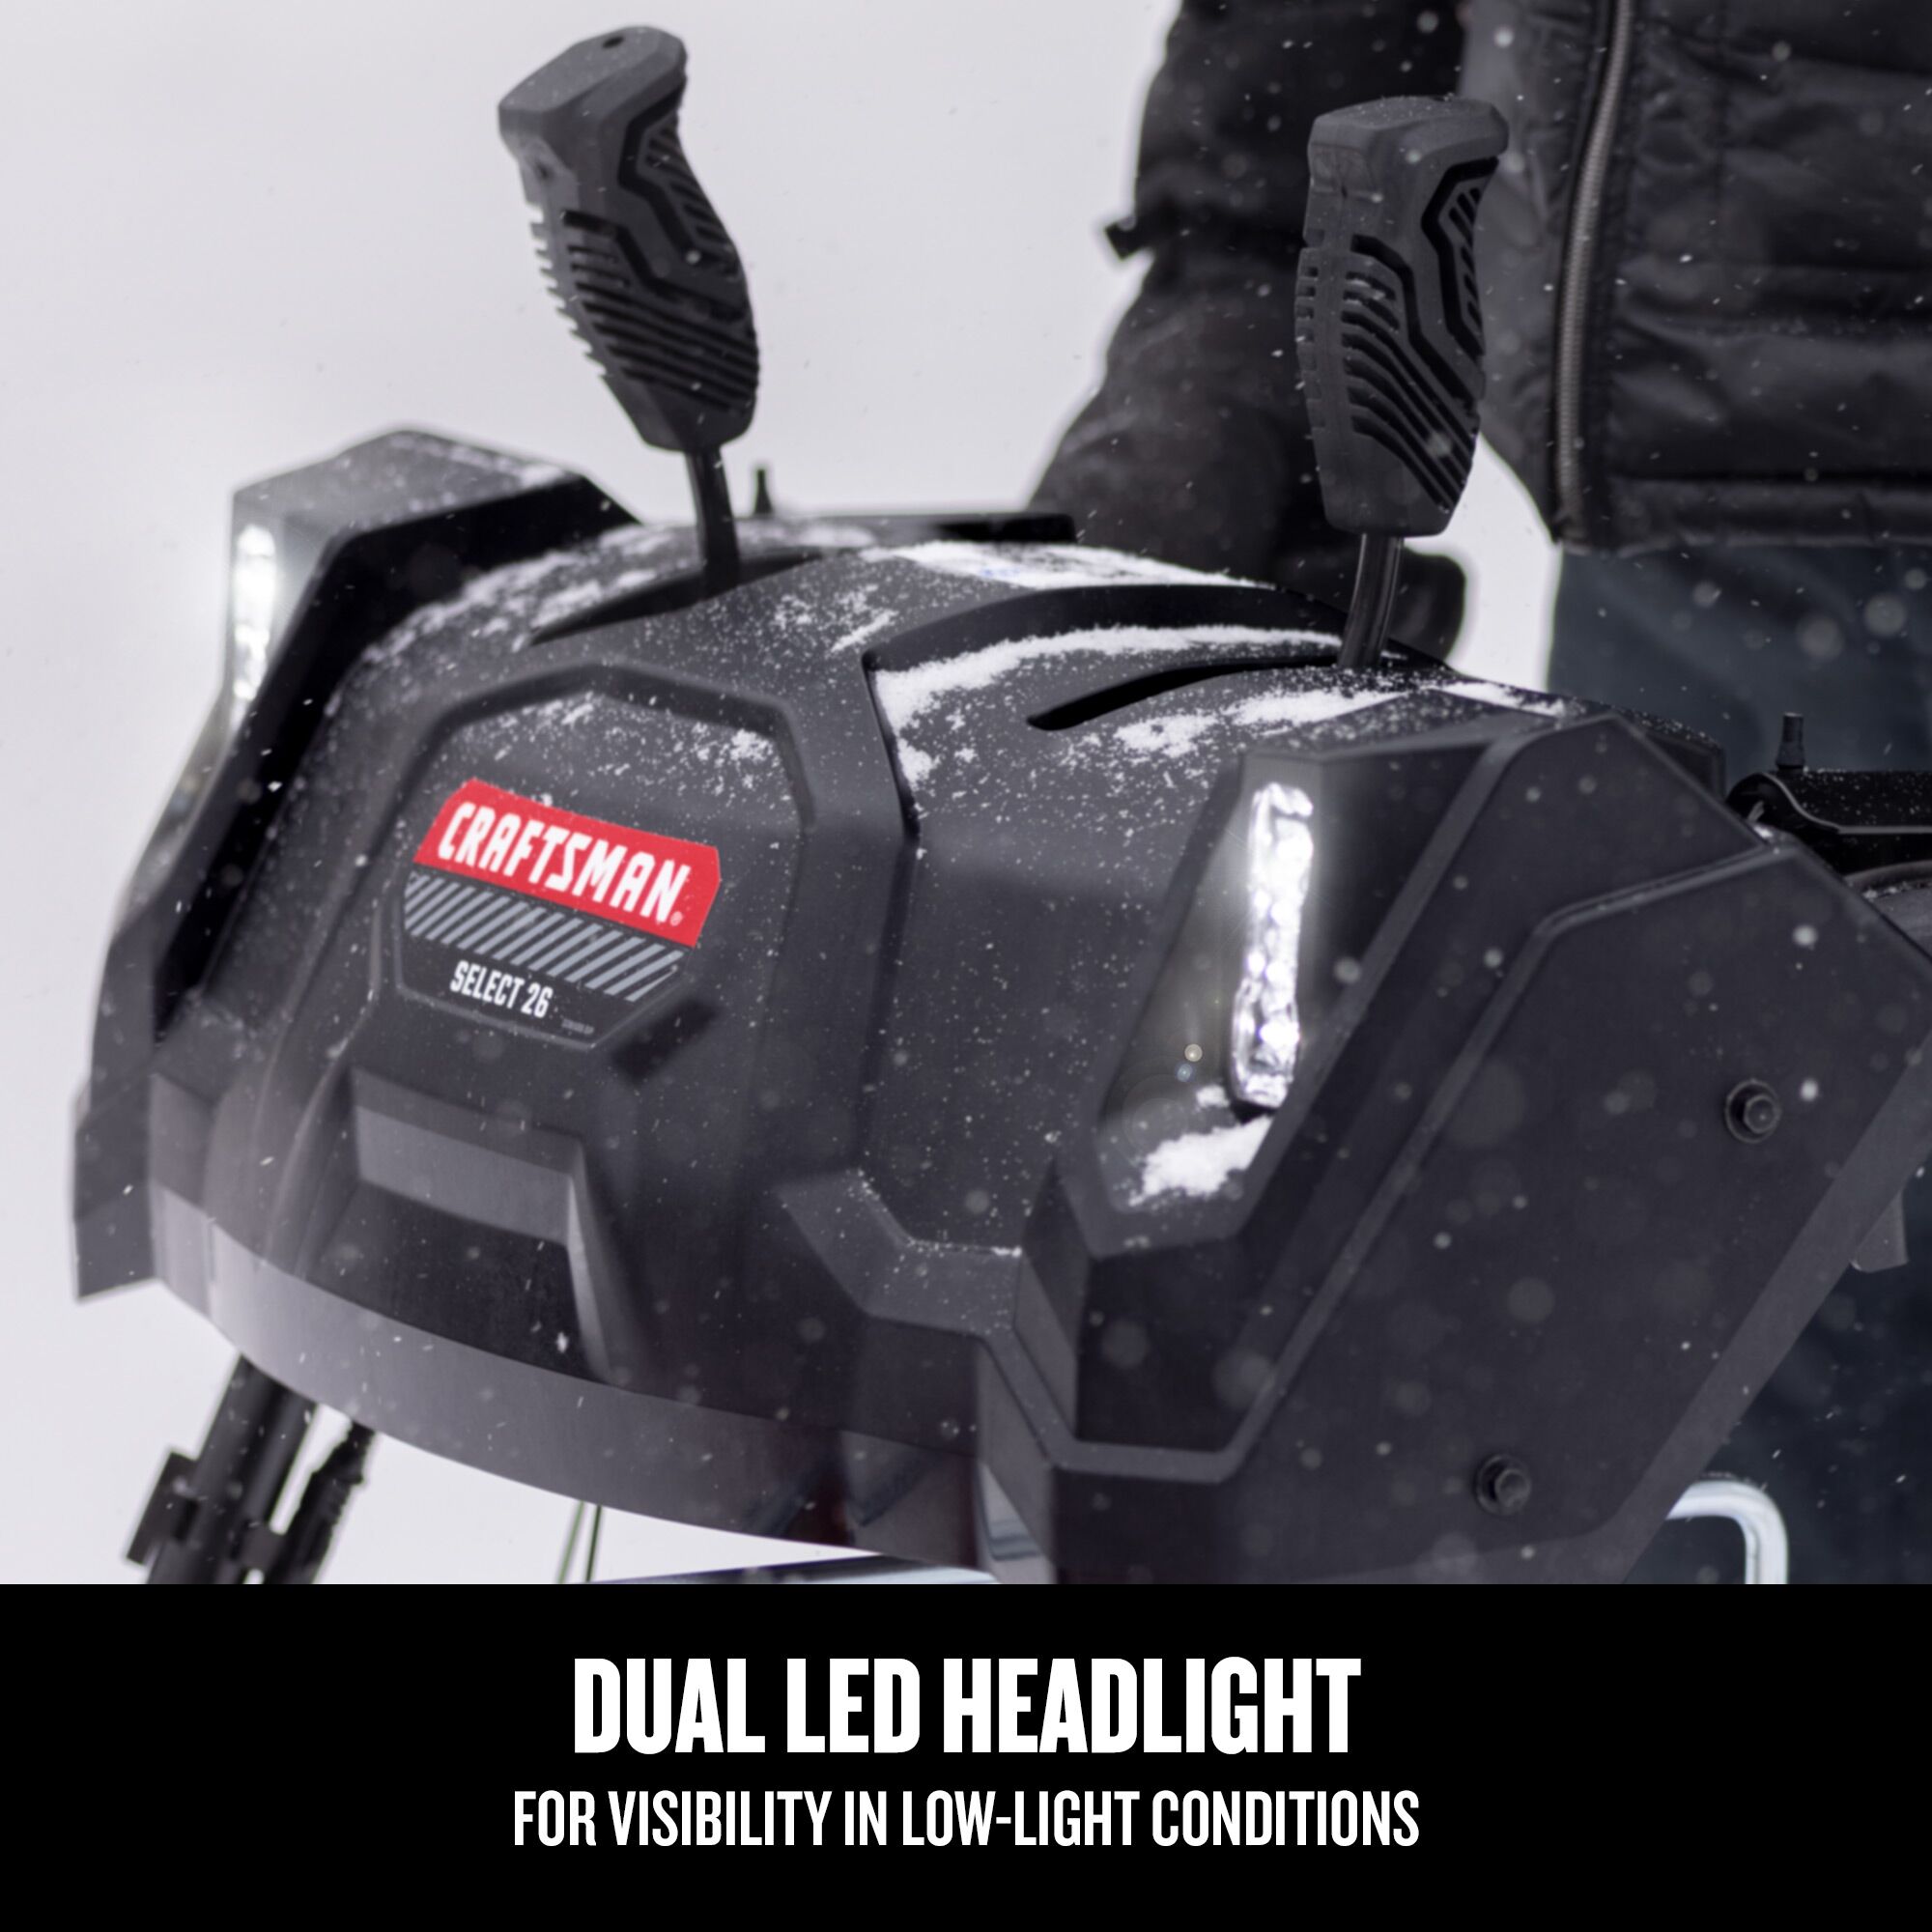 CRAFTSMAN 243 cc 2-Stage Gas Snow Blower focused in on dual led headlight